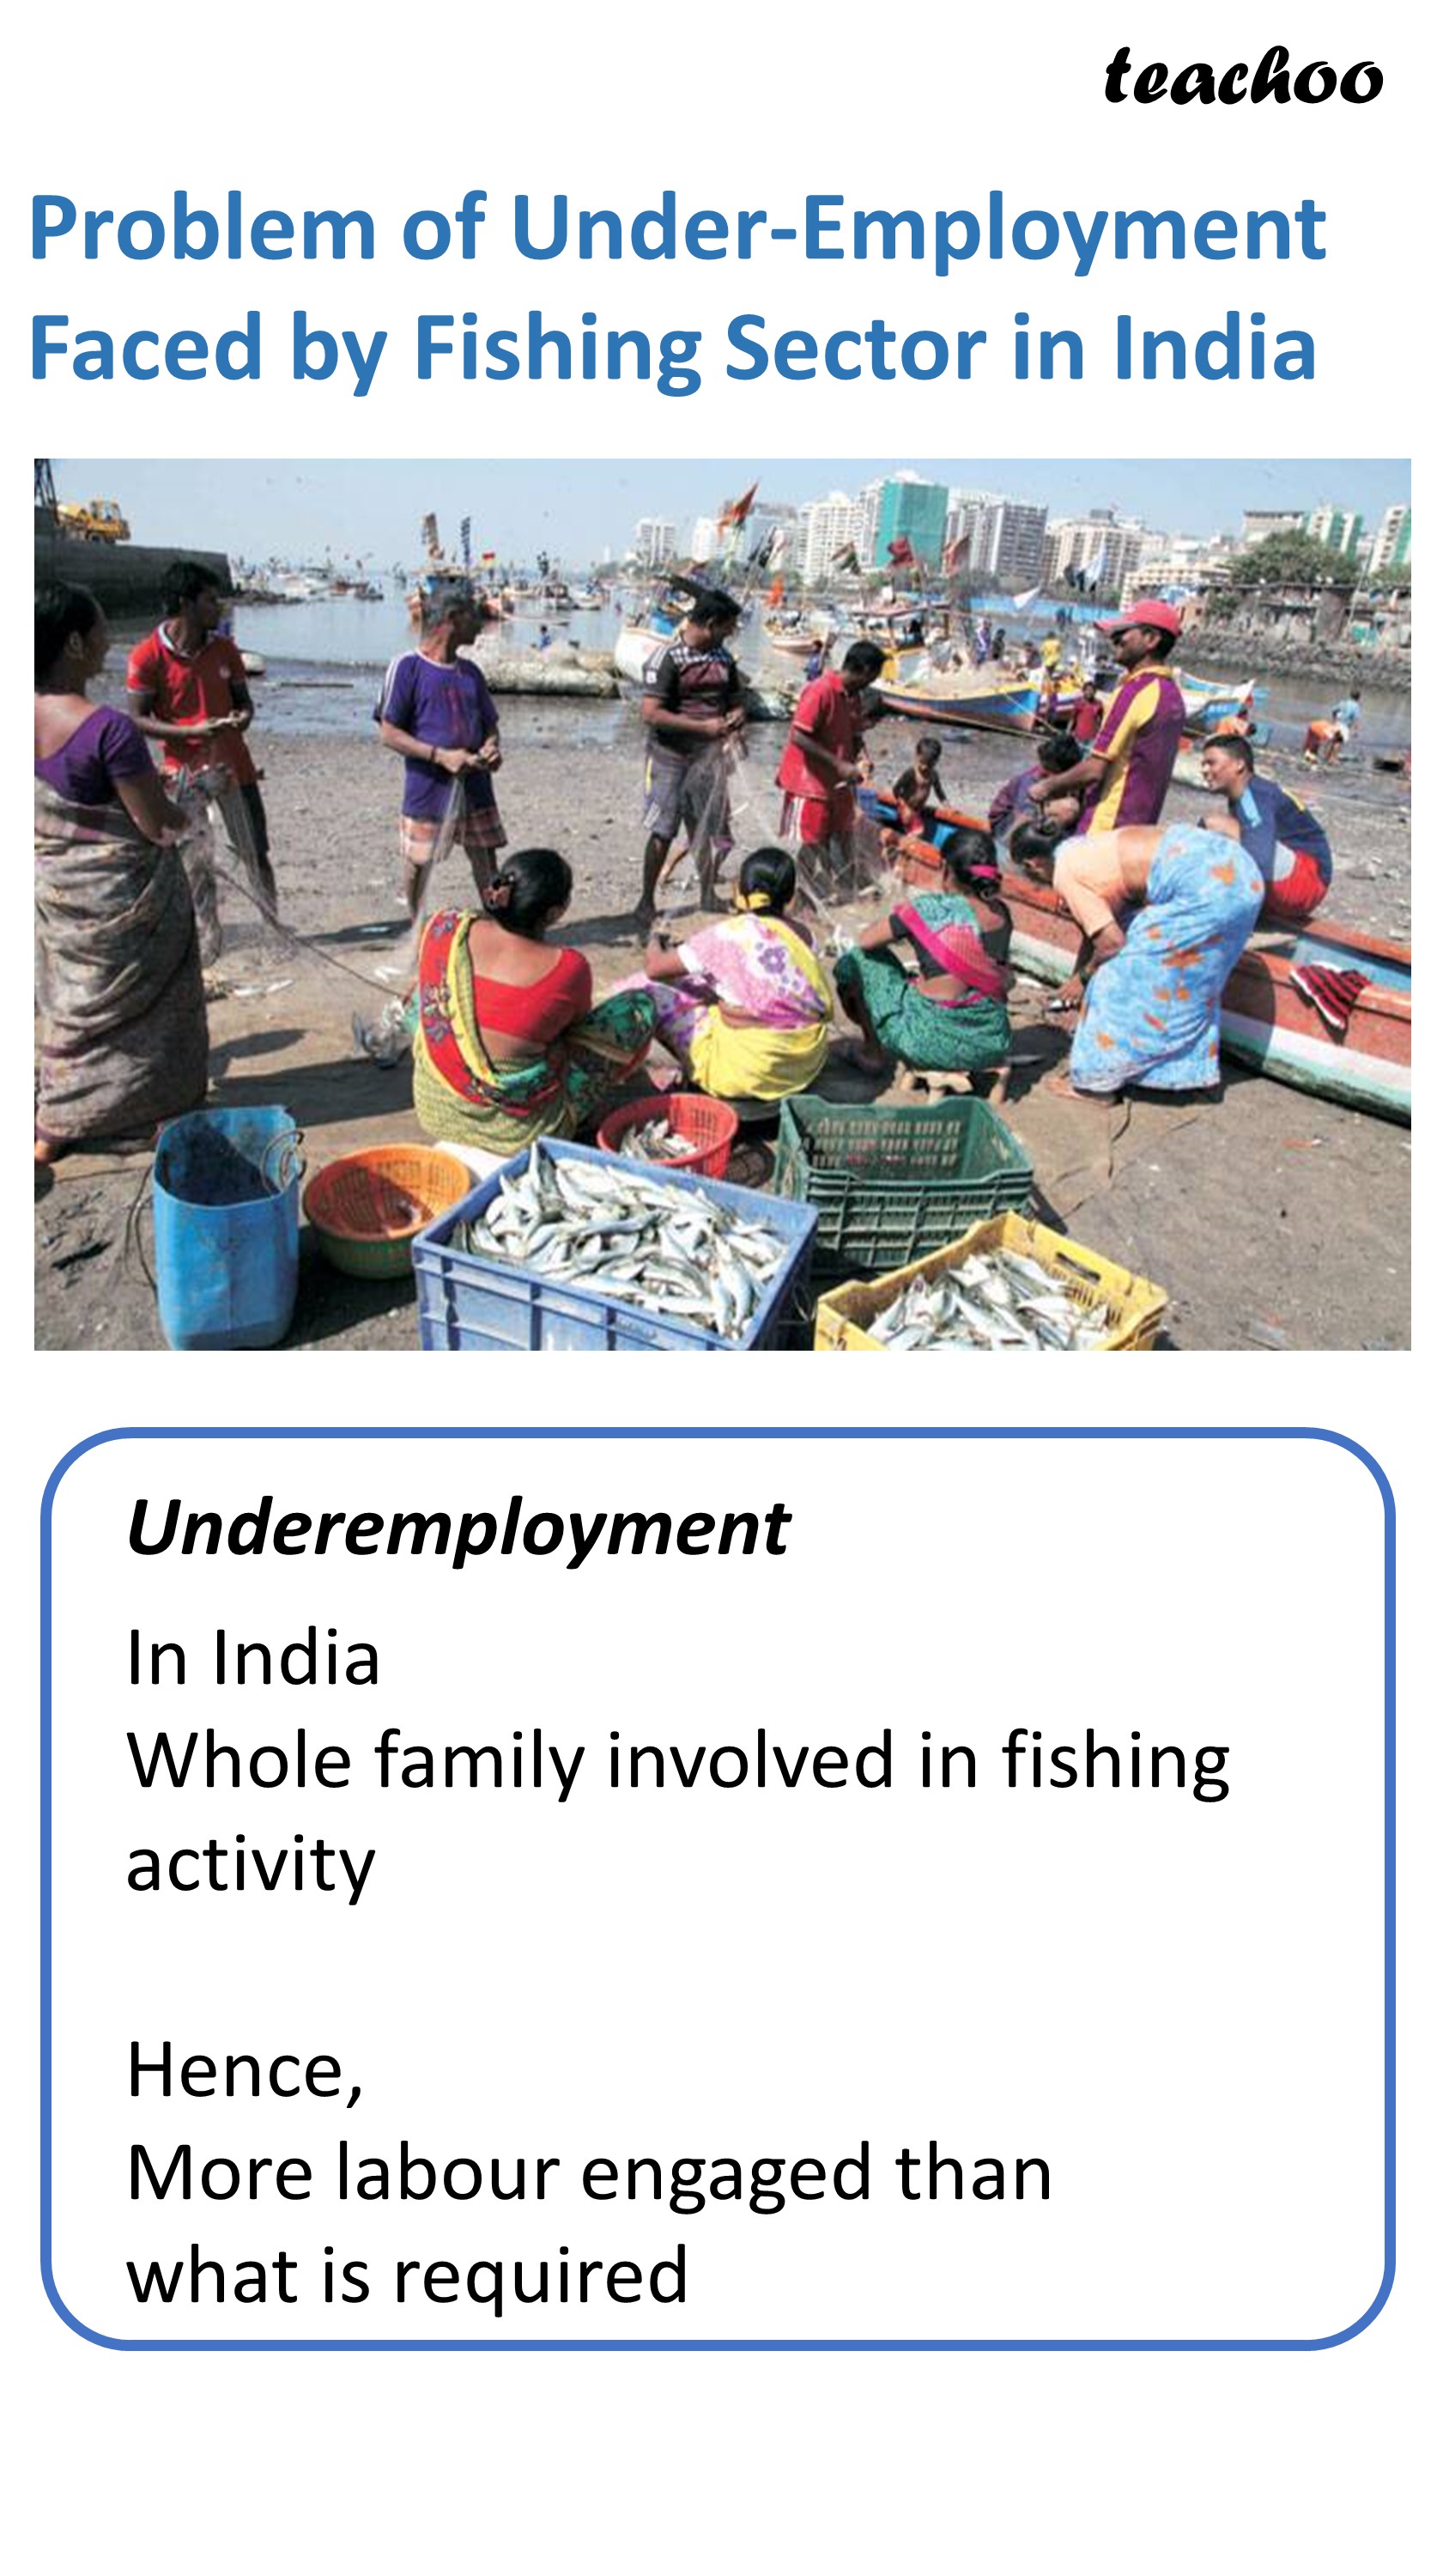 Problem of Under Employment Faced by Fishing Sector in India - Teachoo.JPG